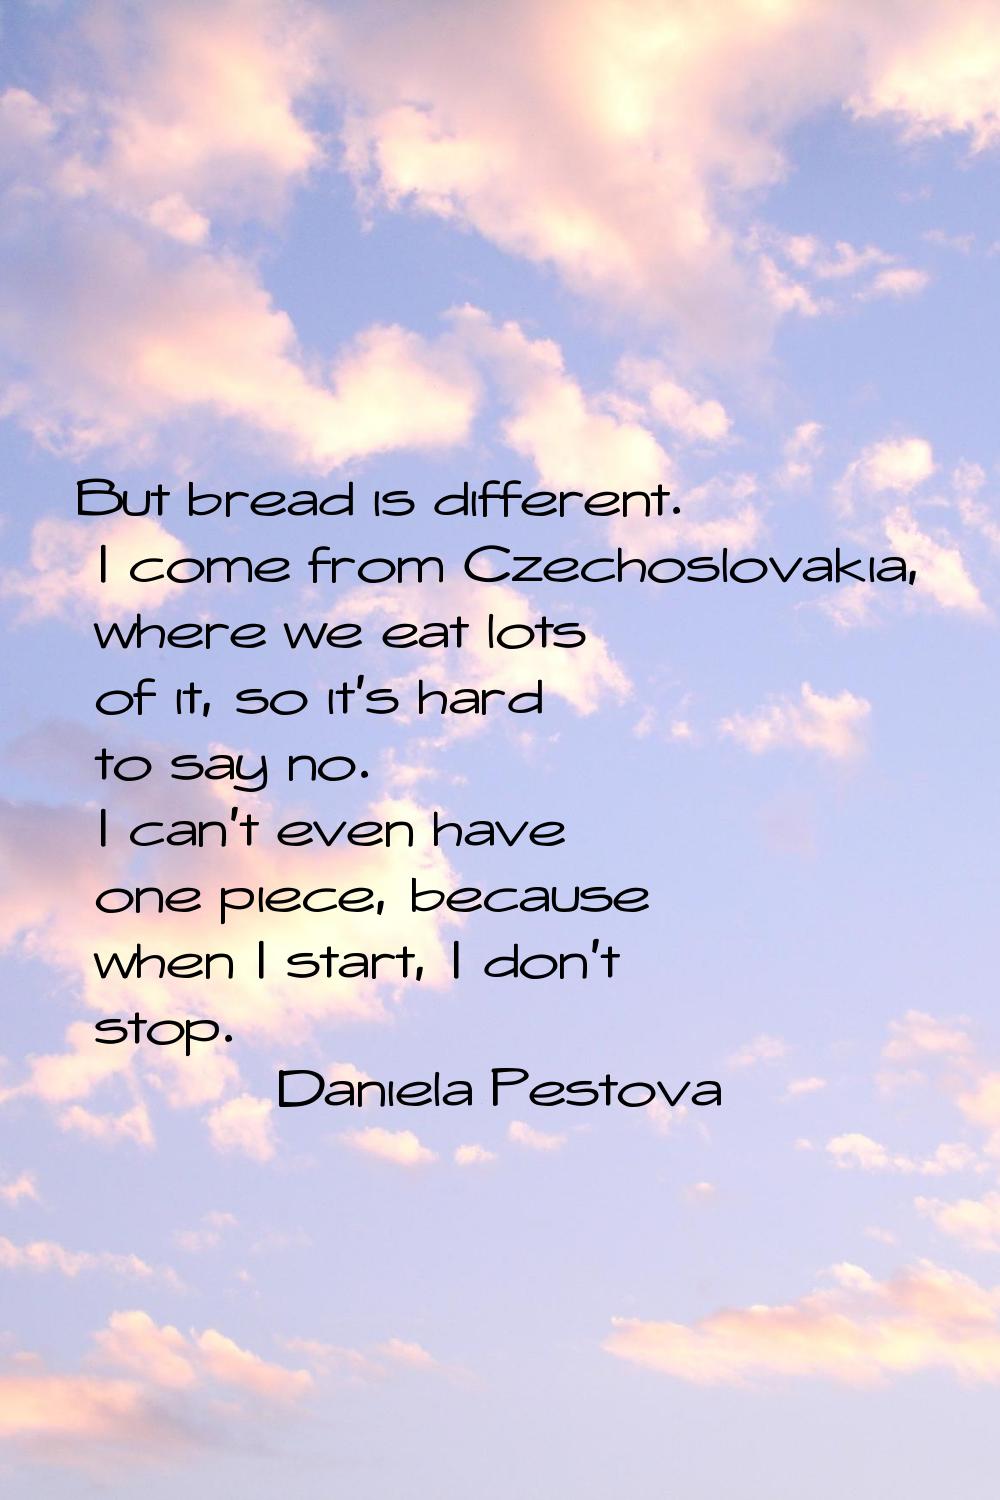 But bread is different. I come from Czechoslovakia, where we eat lots of it, so it's hard to say no